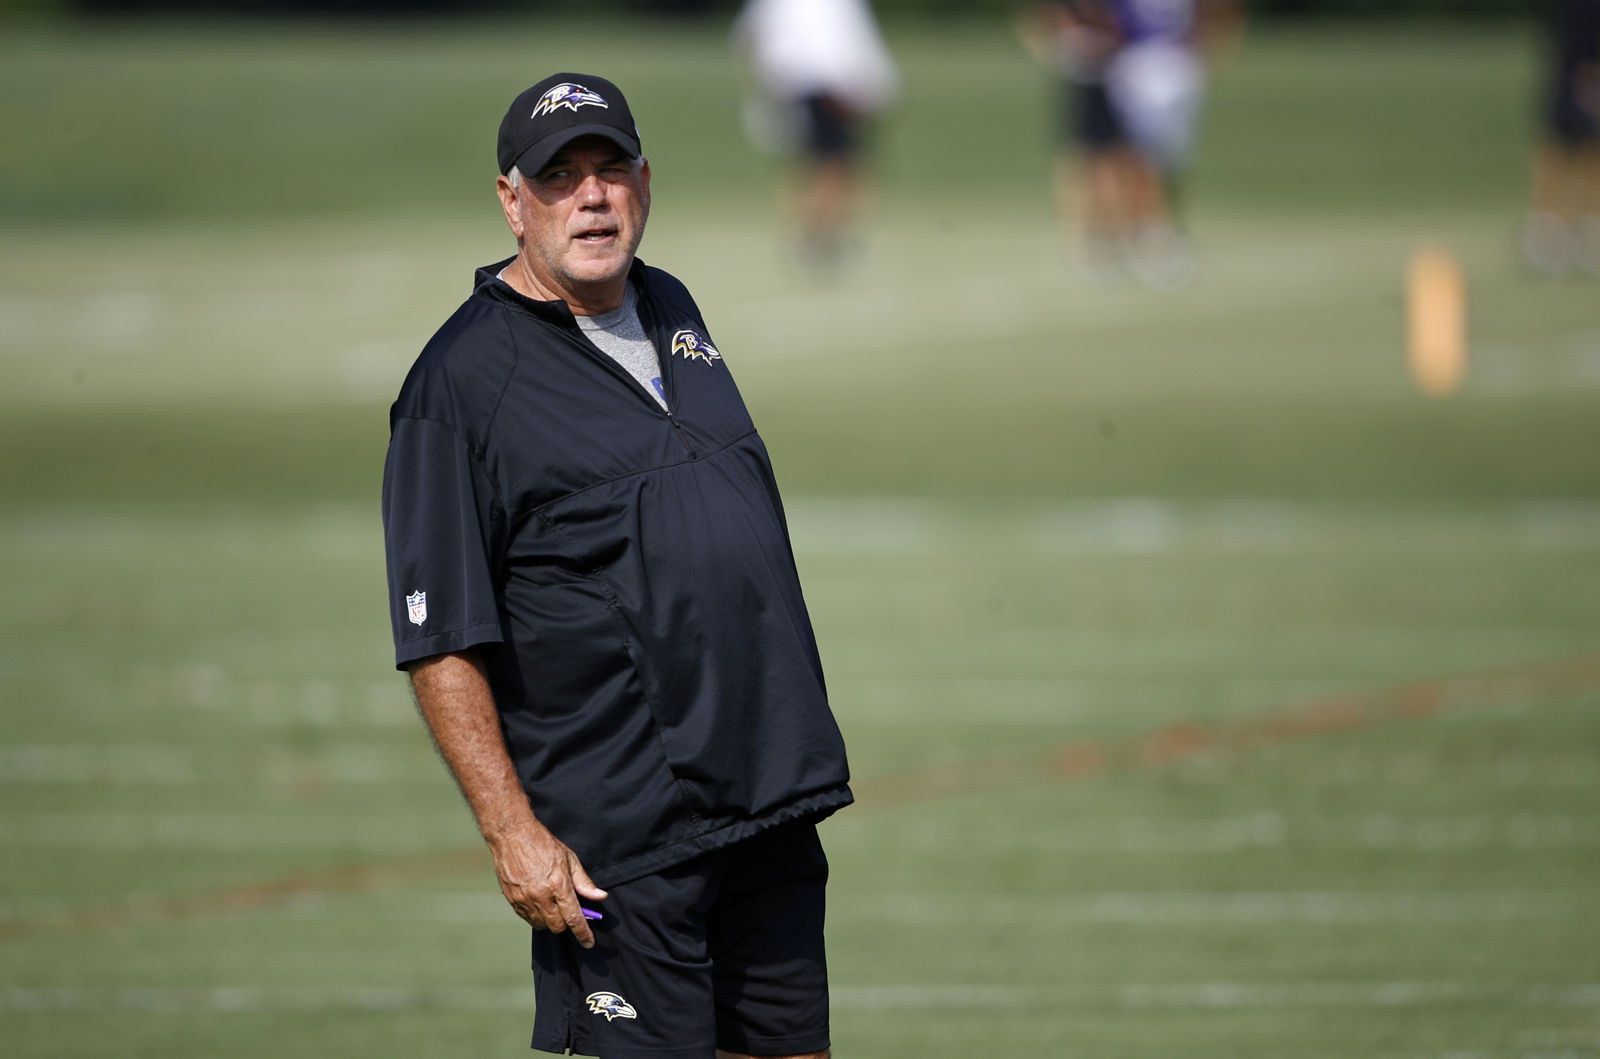 Baltimore Ravens defensive coordinator Dean Pees stands on the field during an NFL football training camp practice in Owings Mills, Md., Wednesday, Aug. 2, 2017. (AP Photo/Patrick Semansky)